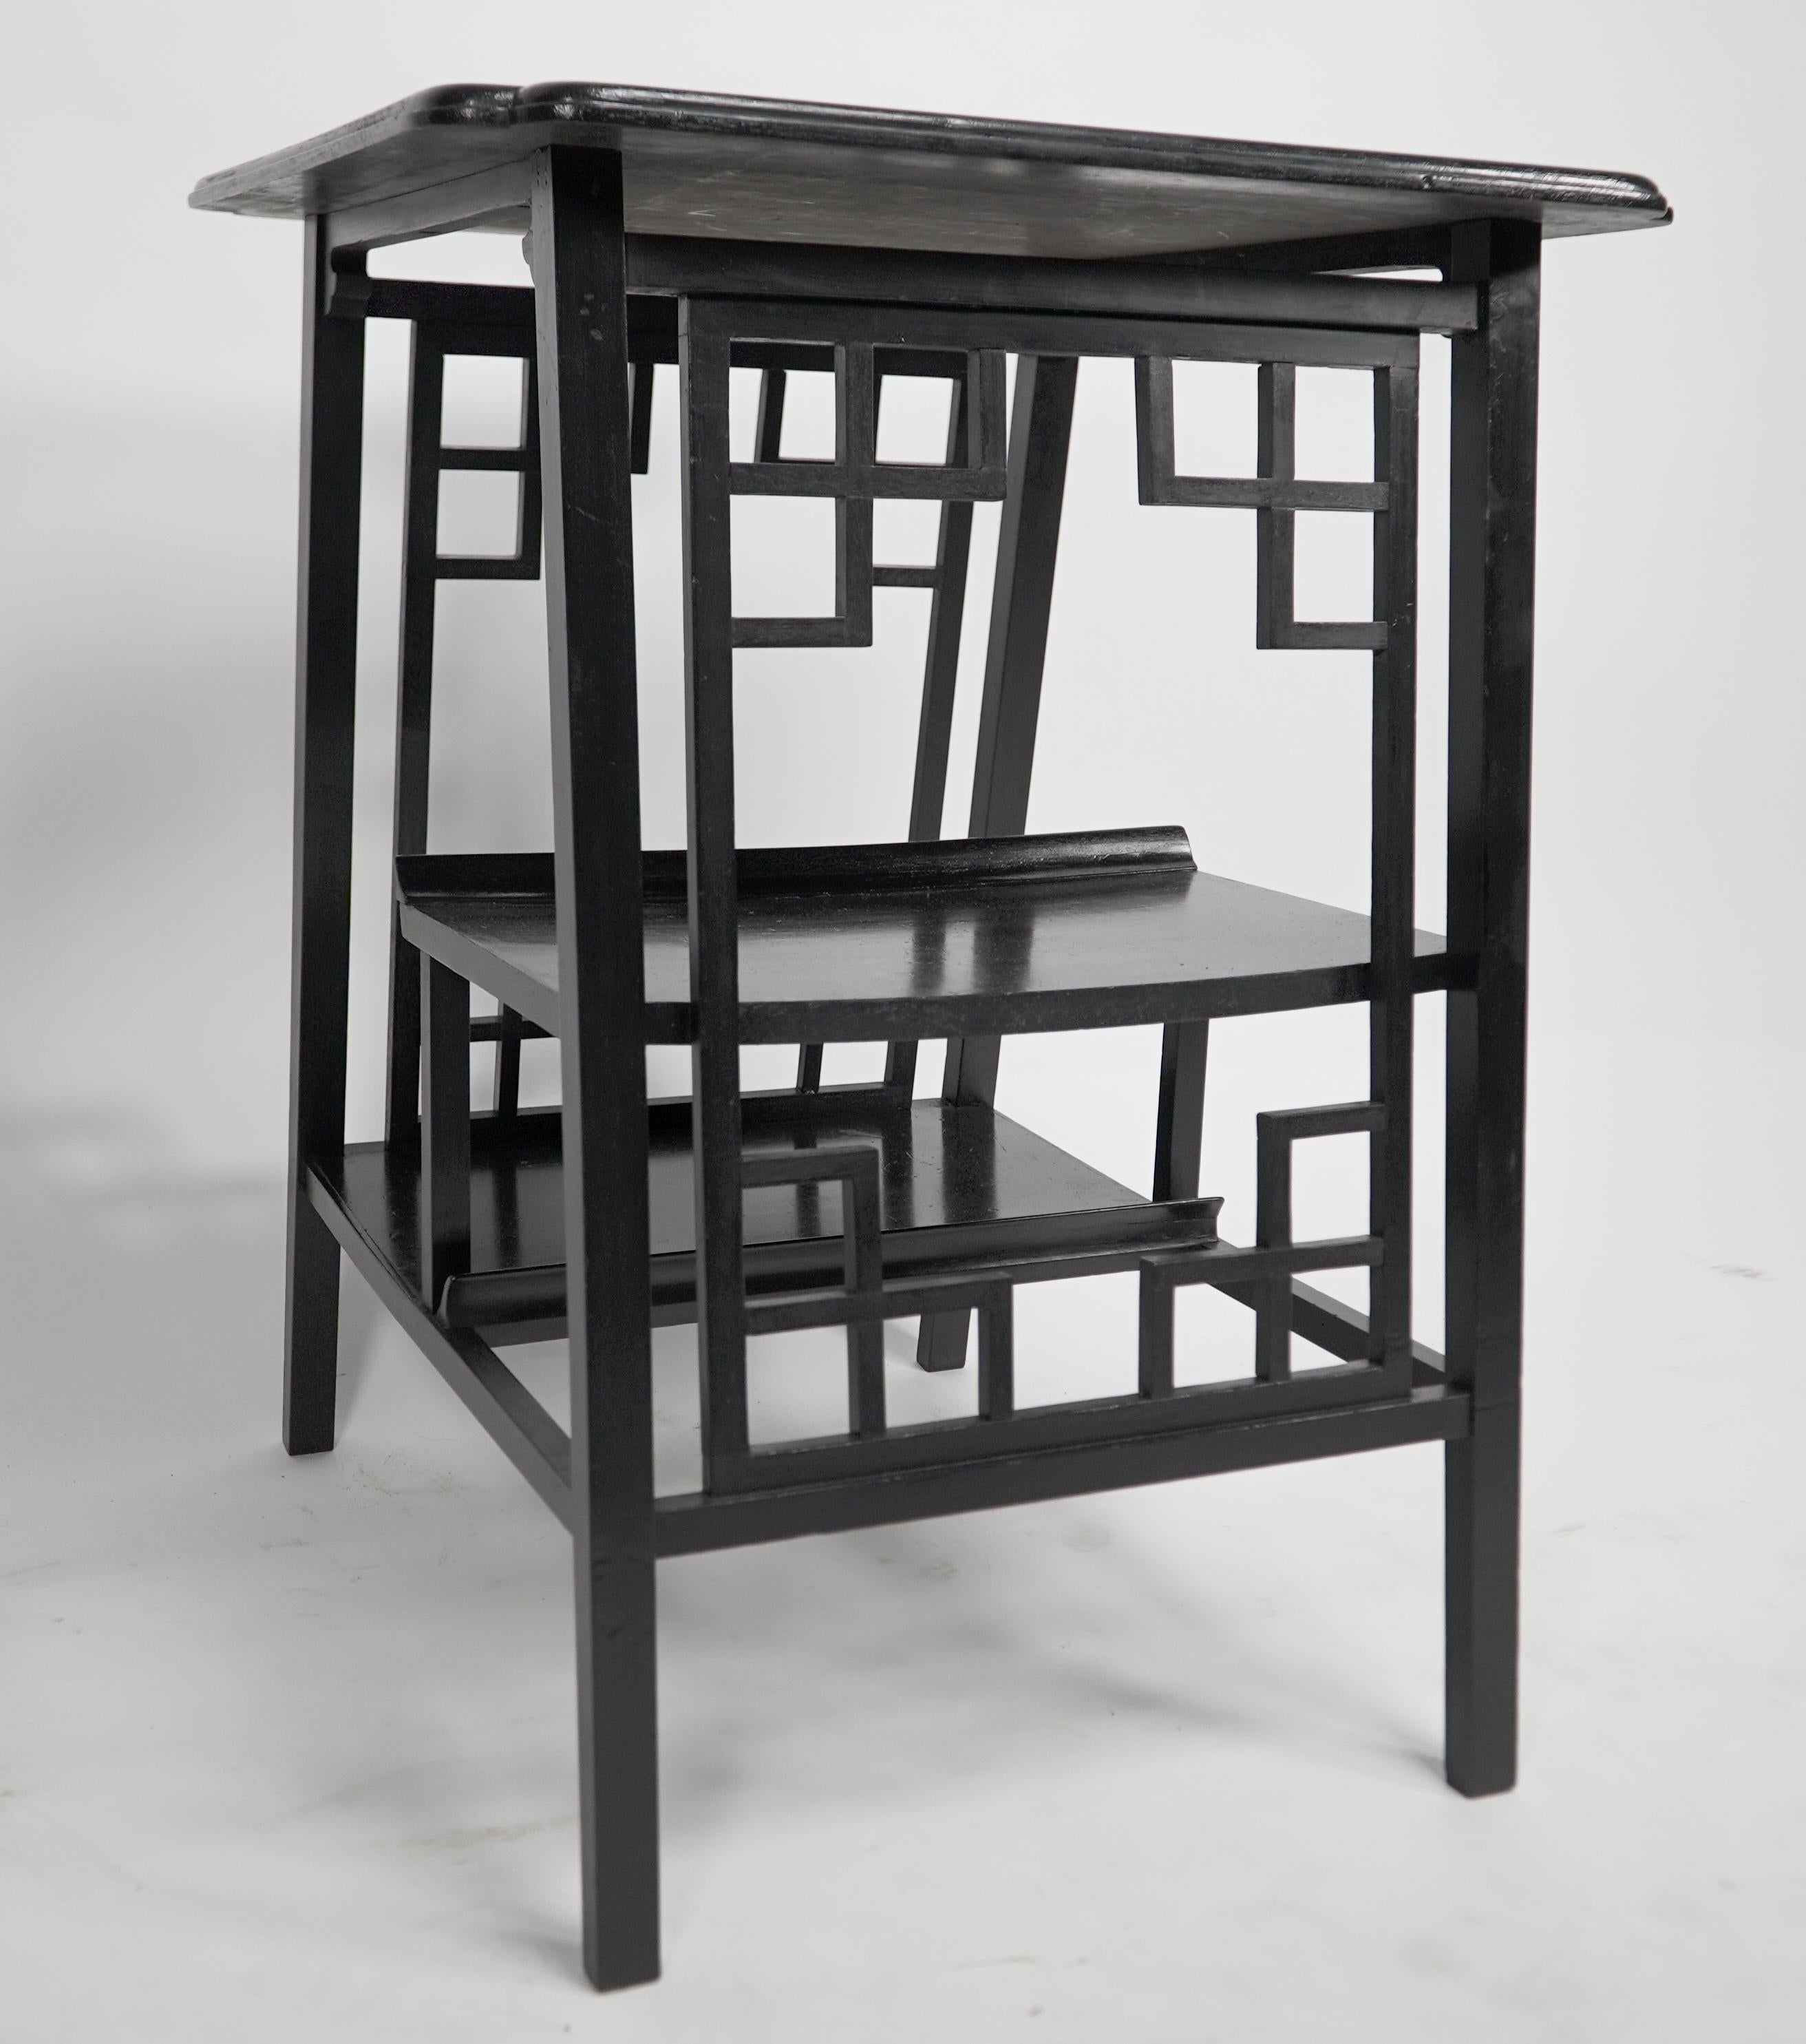 Late 19th Century A Scottish Anglo-Japanese ebonized side table with fretwork & hand carved edges. For Sale